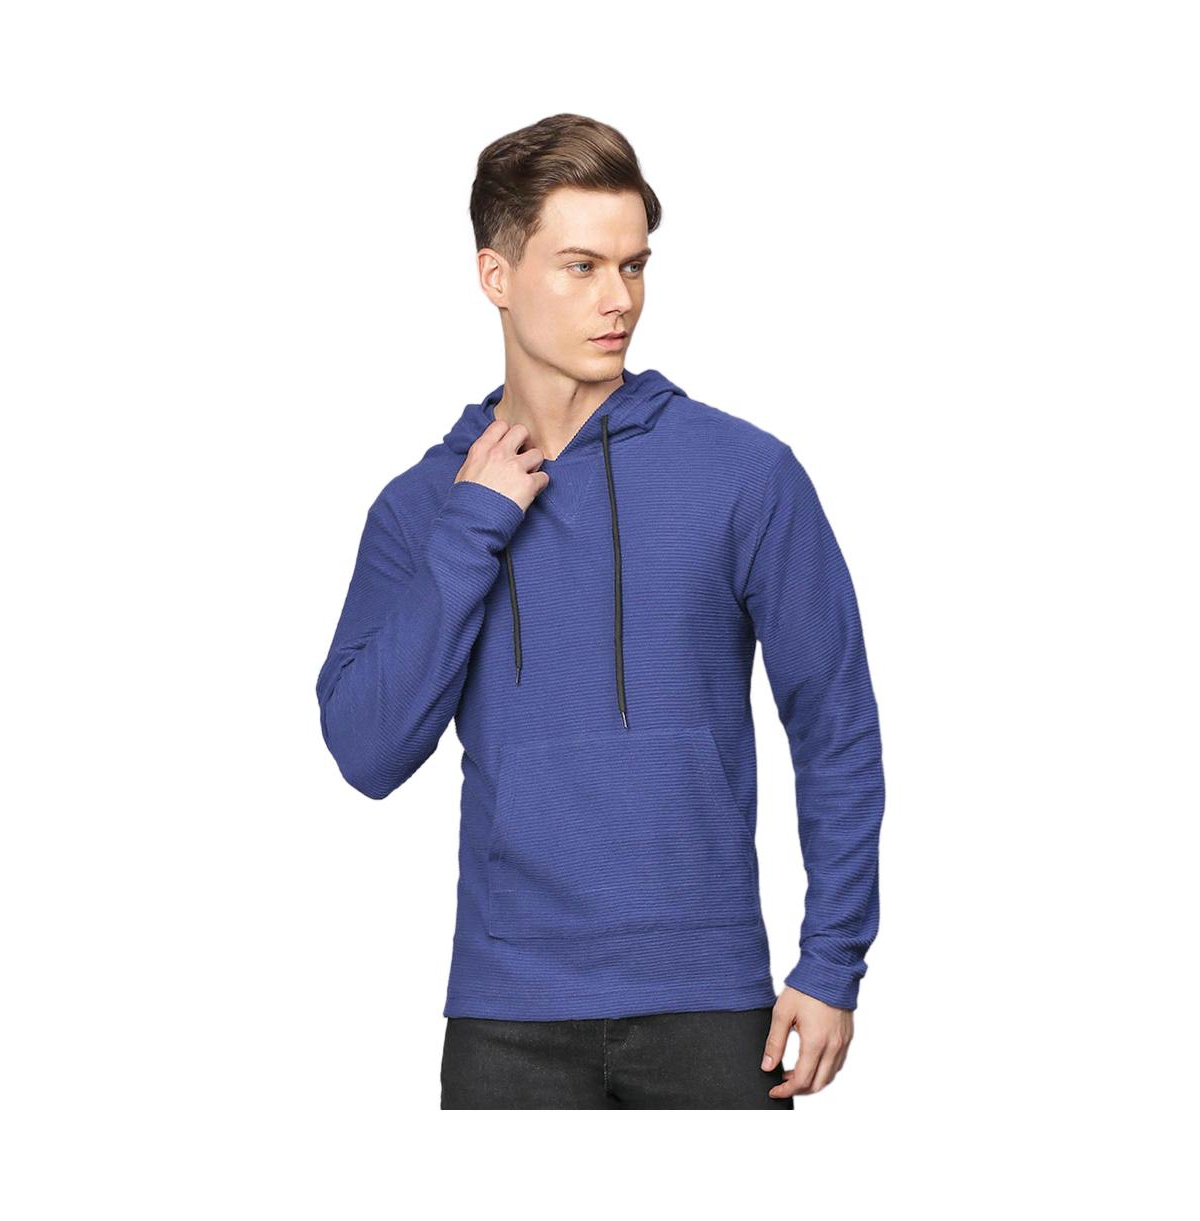 Men's Electric Blue Pullover Hoodie With Contrast Drawstring - Electric blue